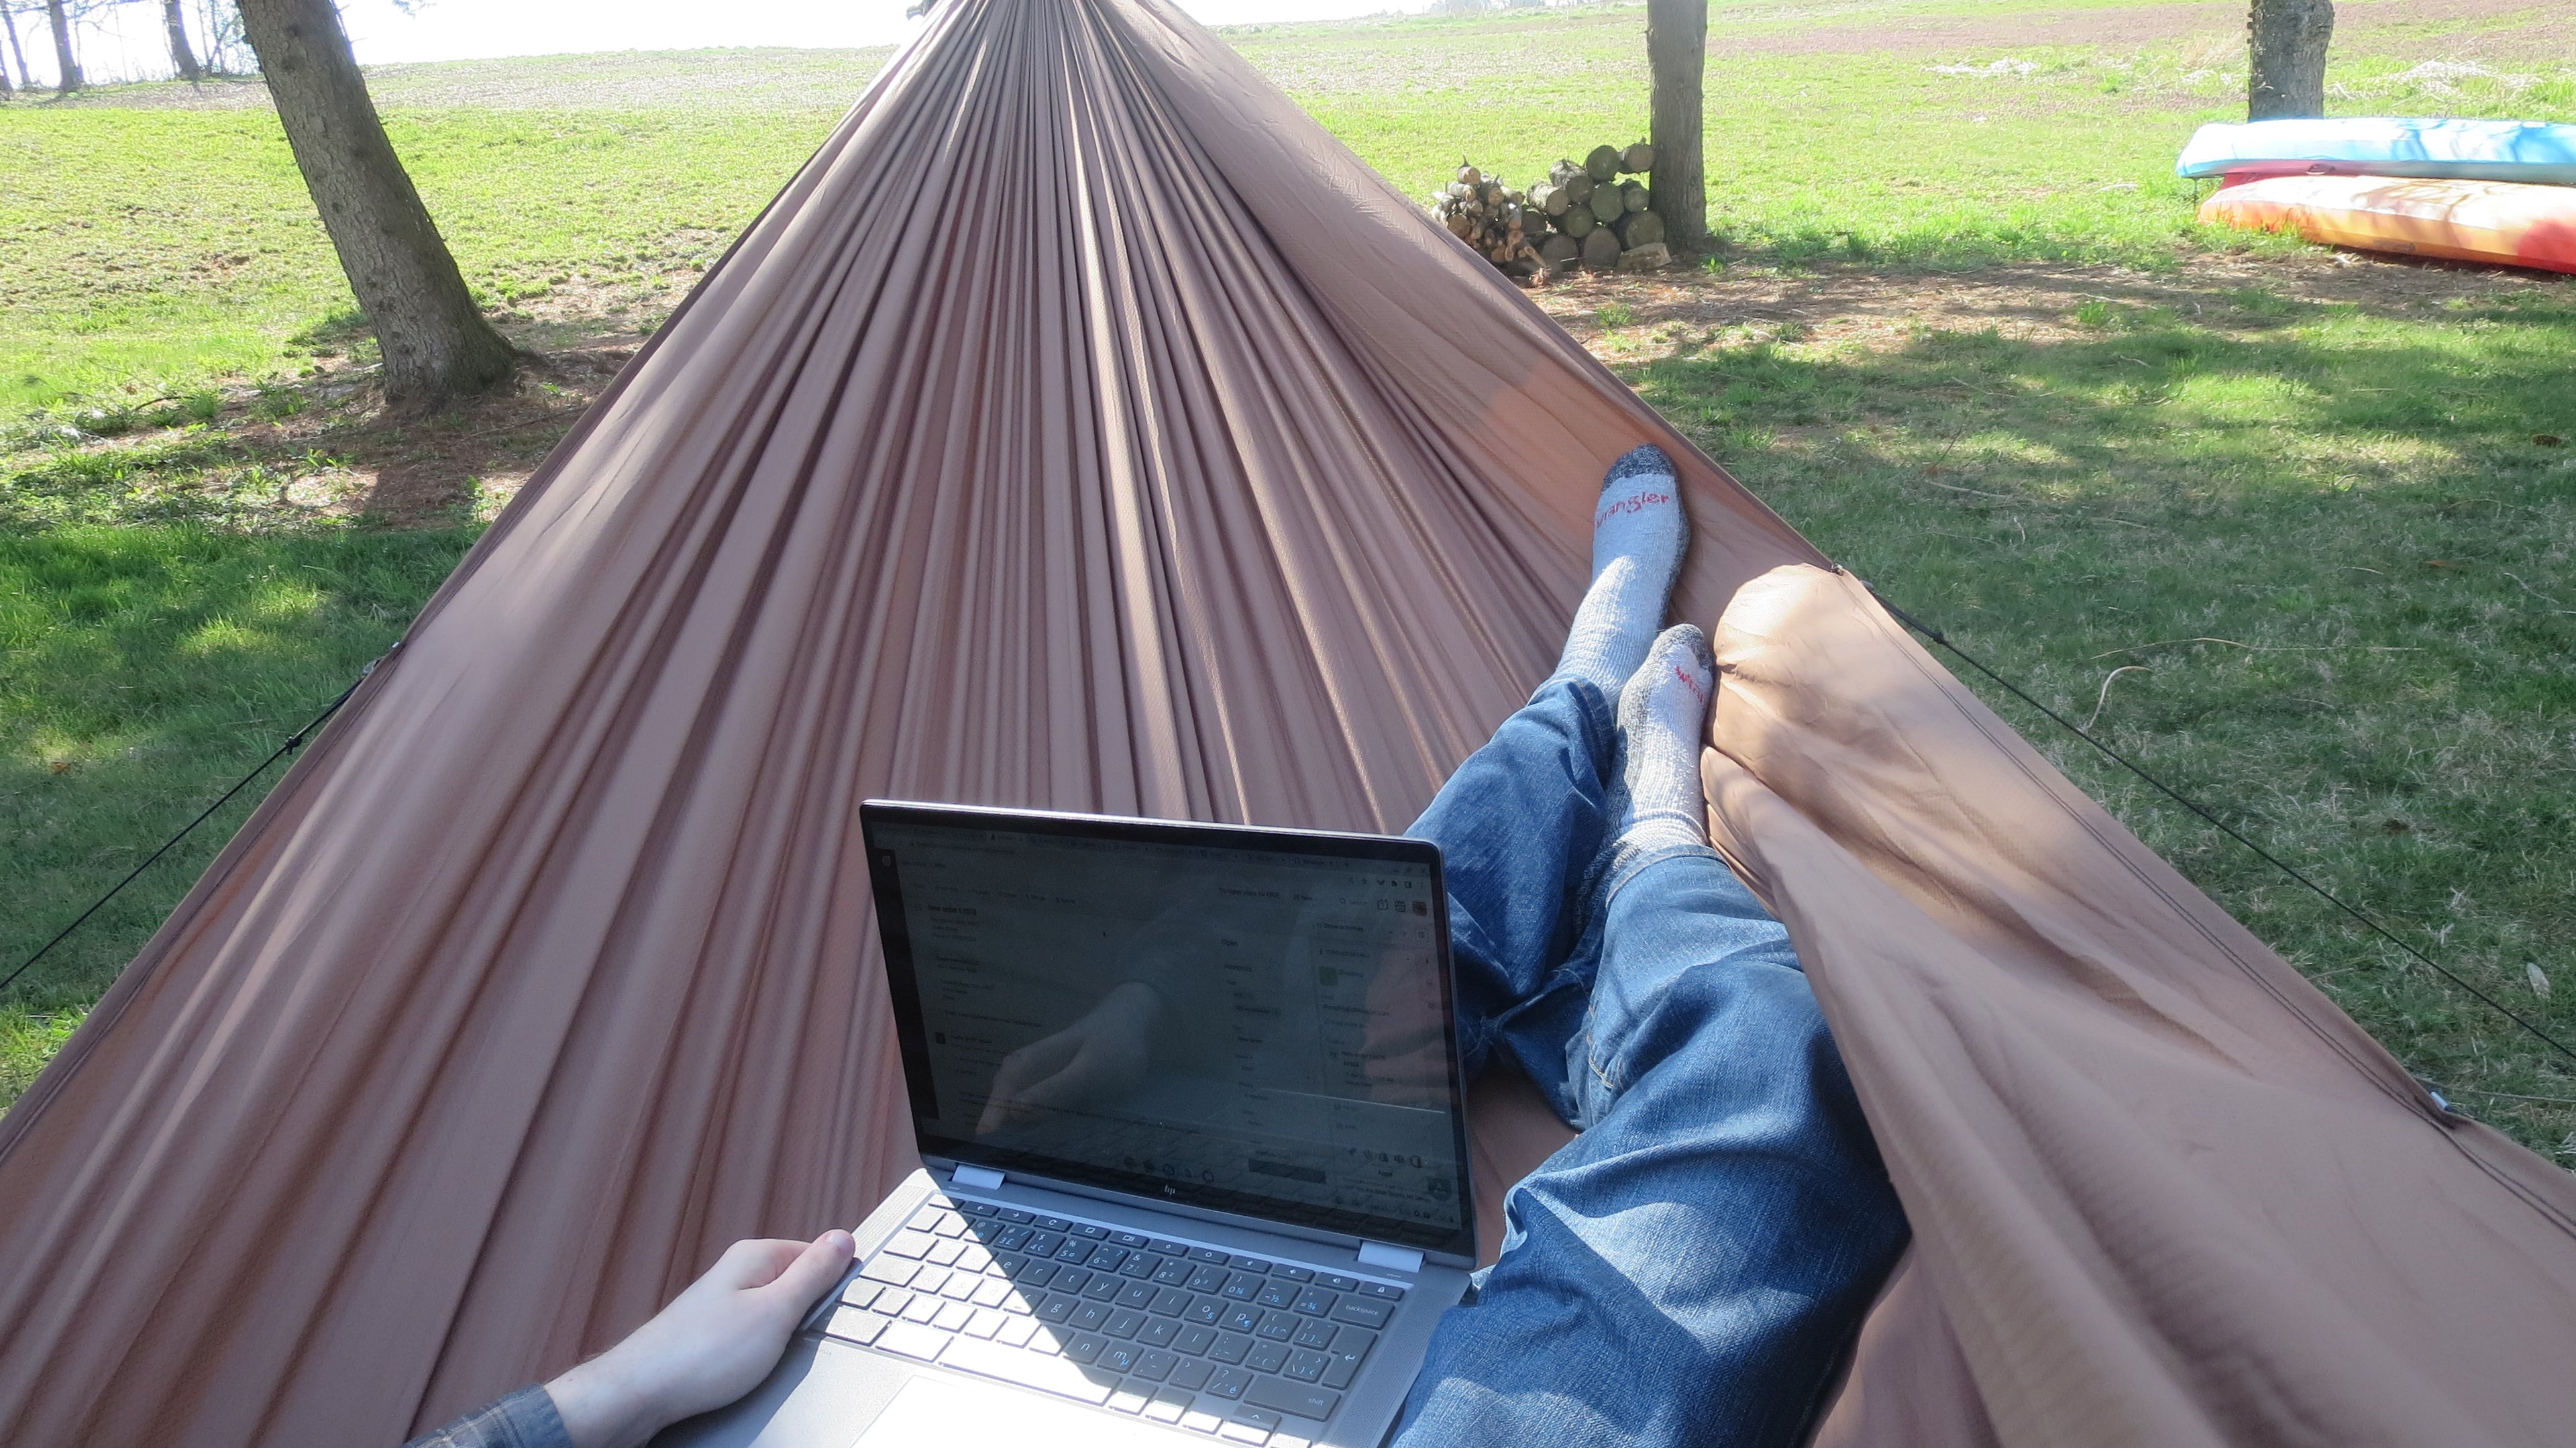 Working on a computer while laying in a coyote brown freebird - netless camping hammock or backpacking hammock